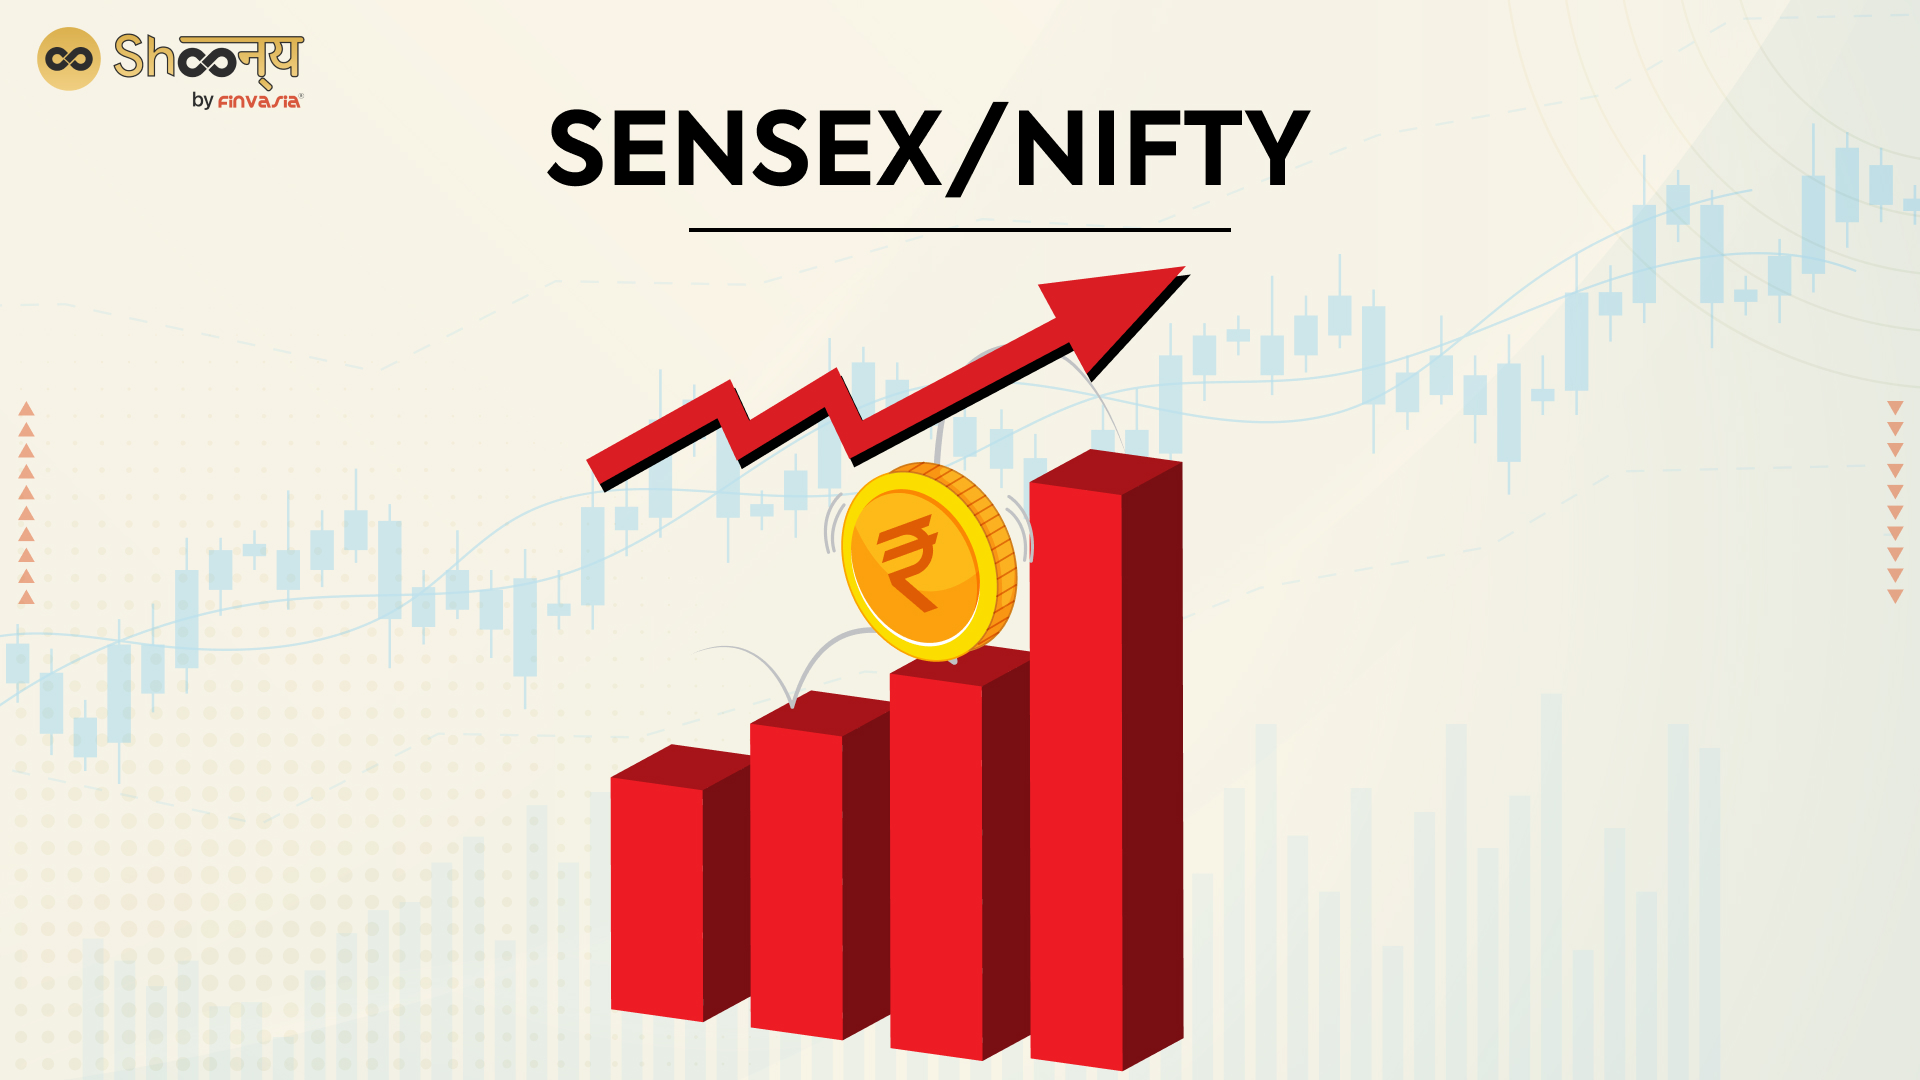 What Are Sensex And Nifty?